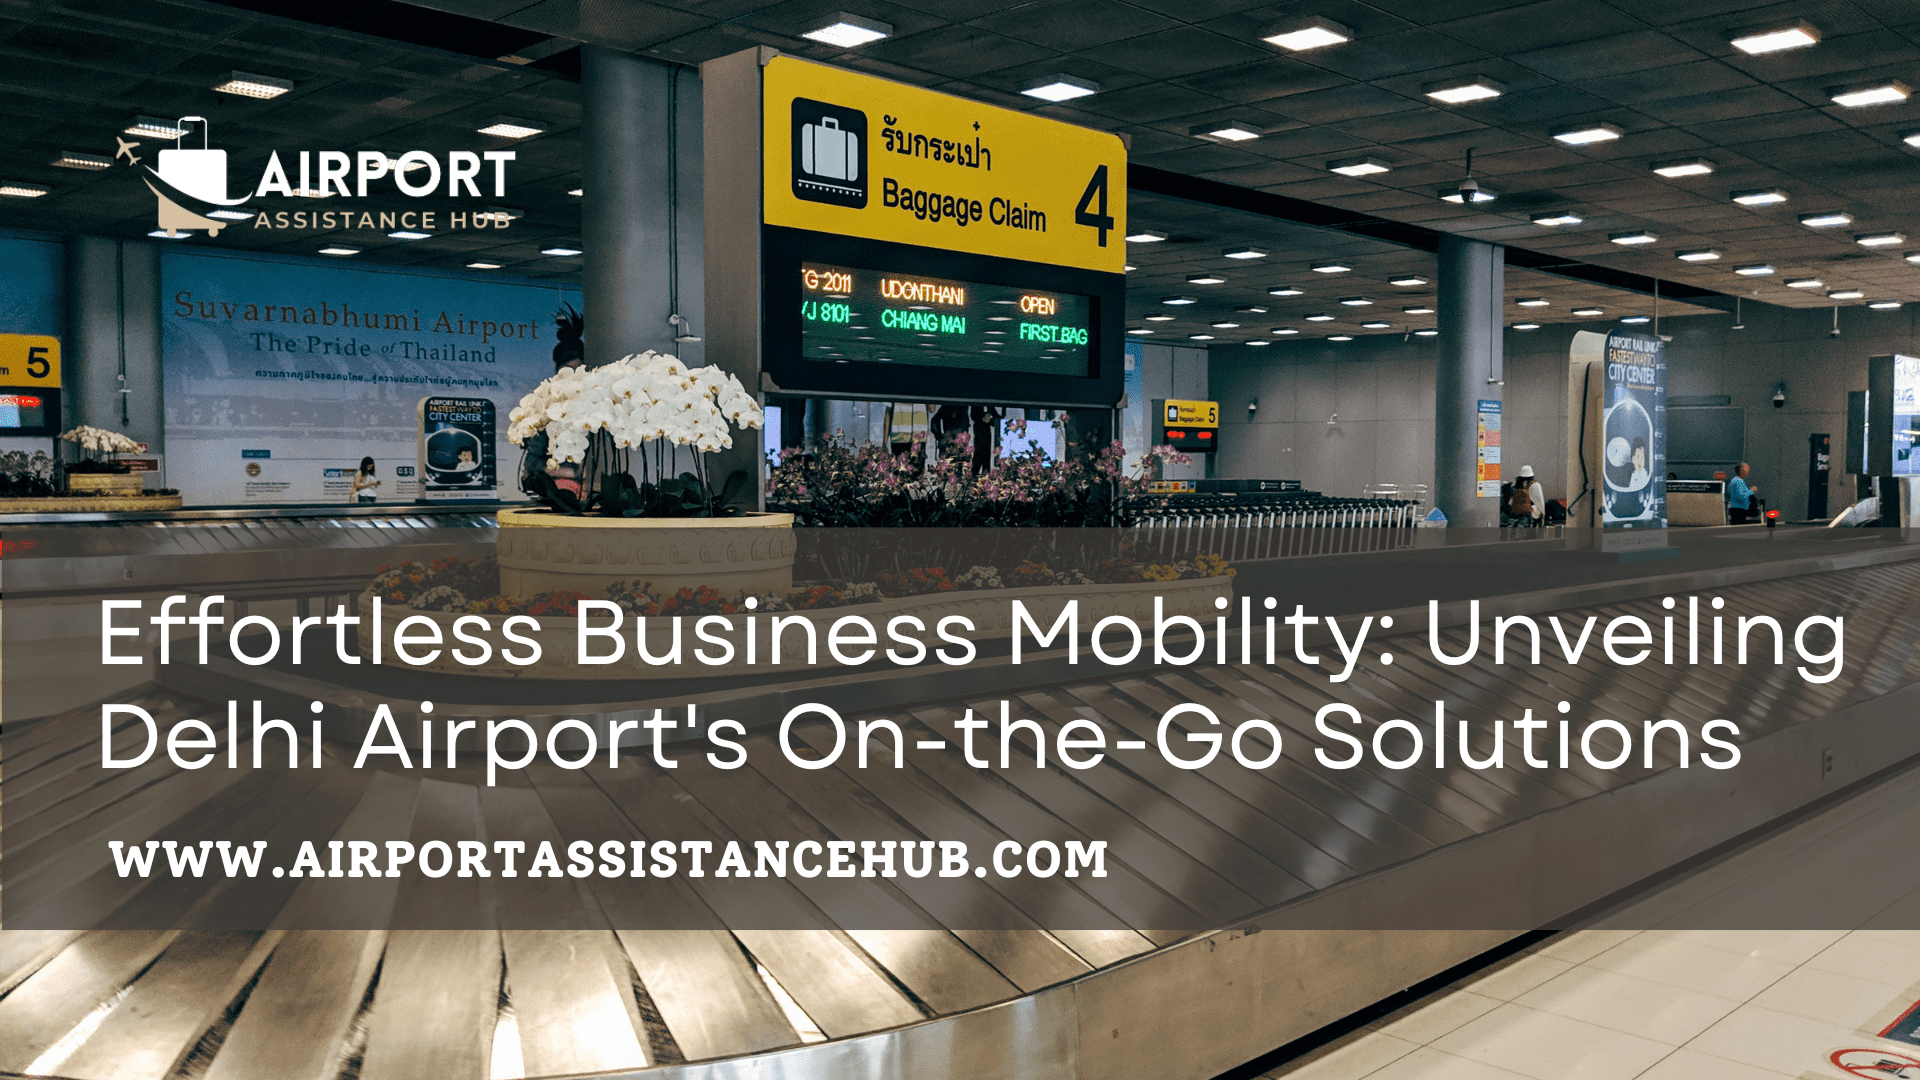 Effortless Business Mobility: Unveiling Delhi Airport’s On-the-Go Solutions